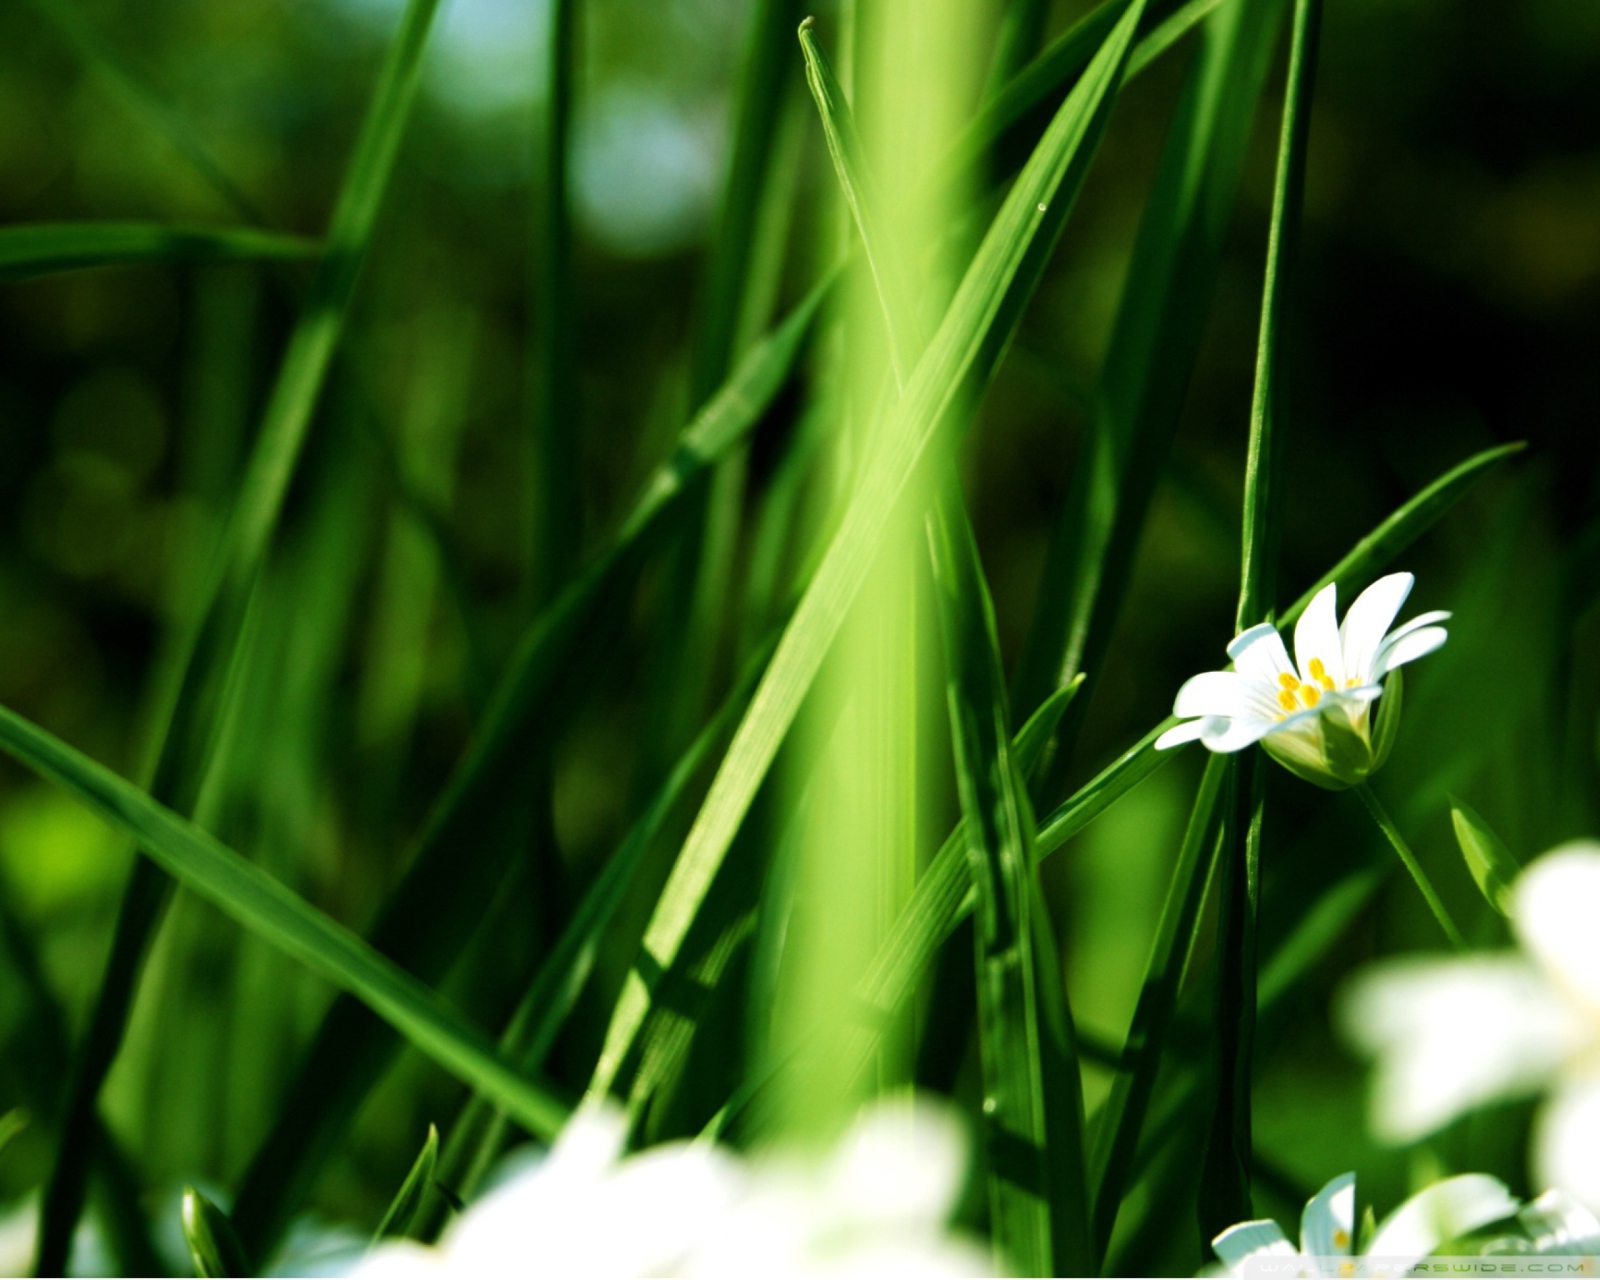 Grass And White Flowers wallpaper 1600x1280